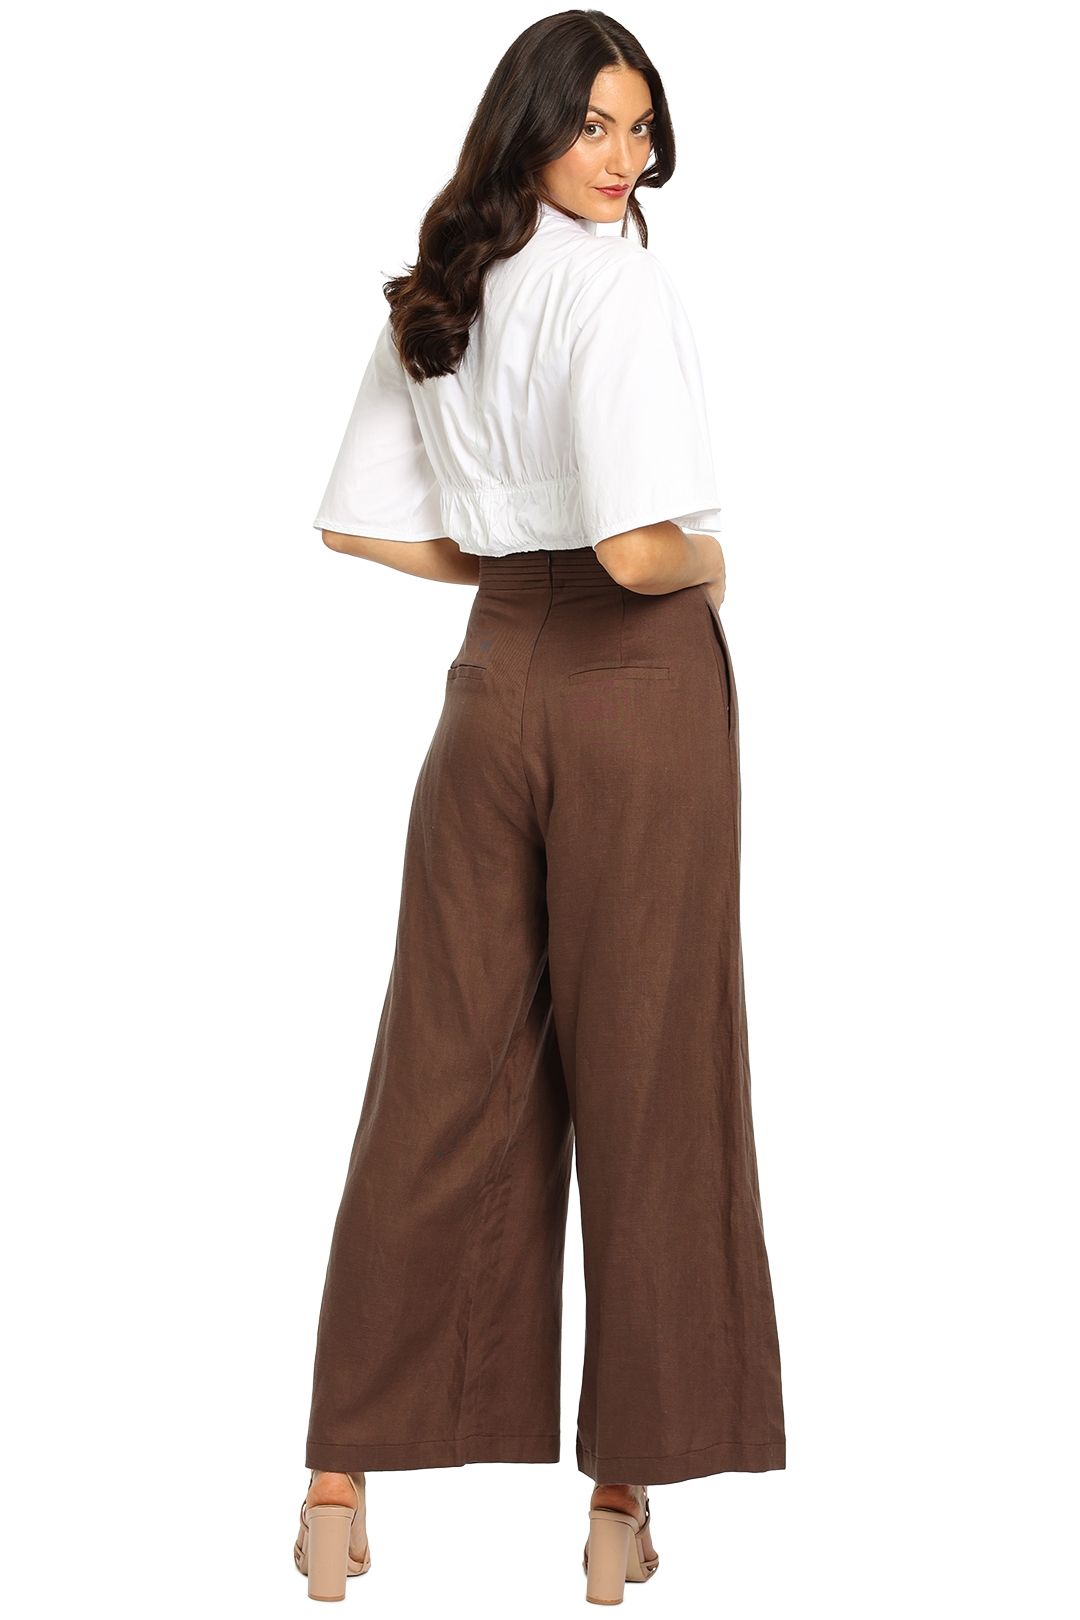 Ministry of Style Elysian Wide Leg Pant High Waisted